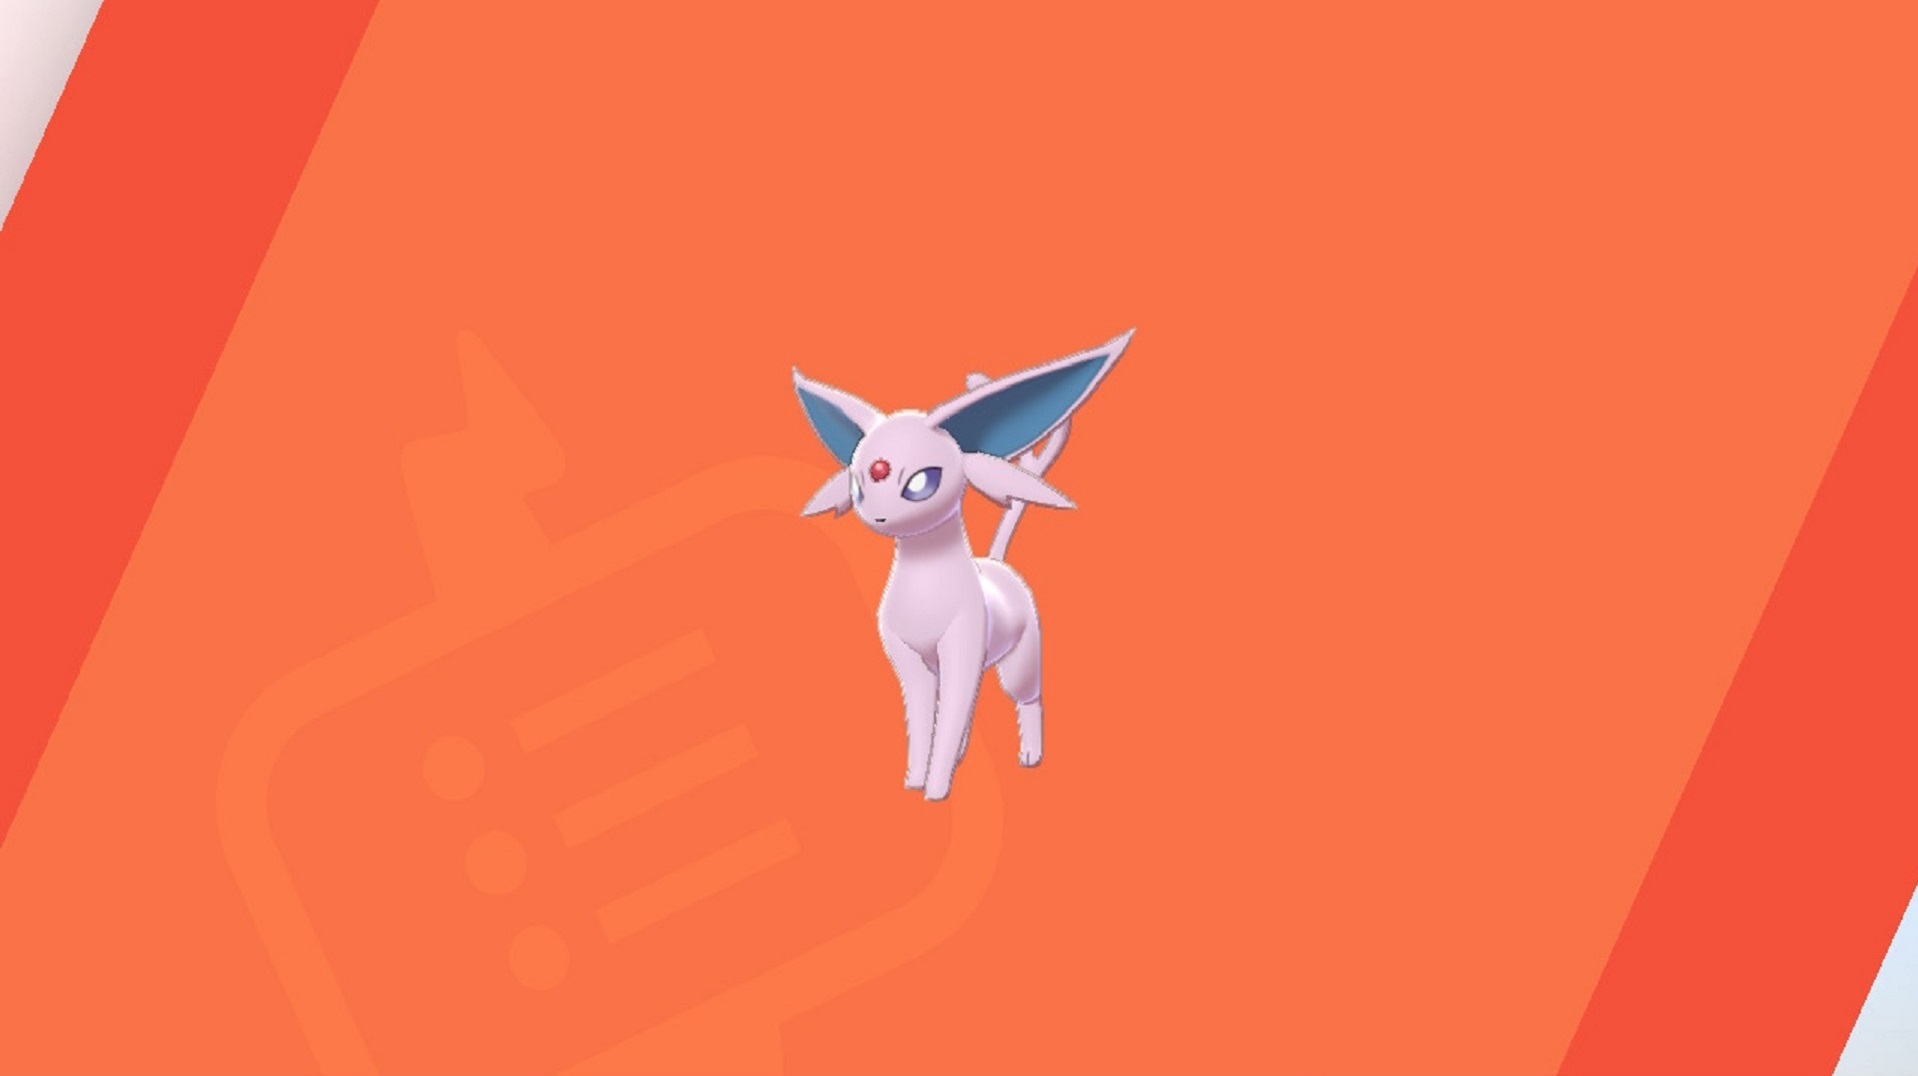 Pokémon Eevee evolutions: Espeon against a red background.